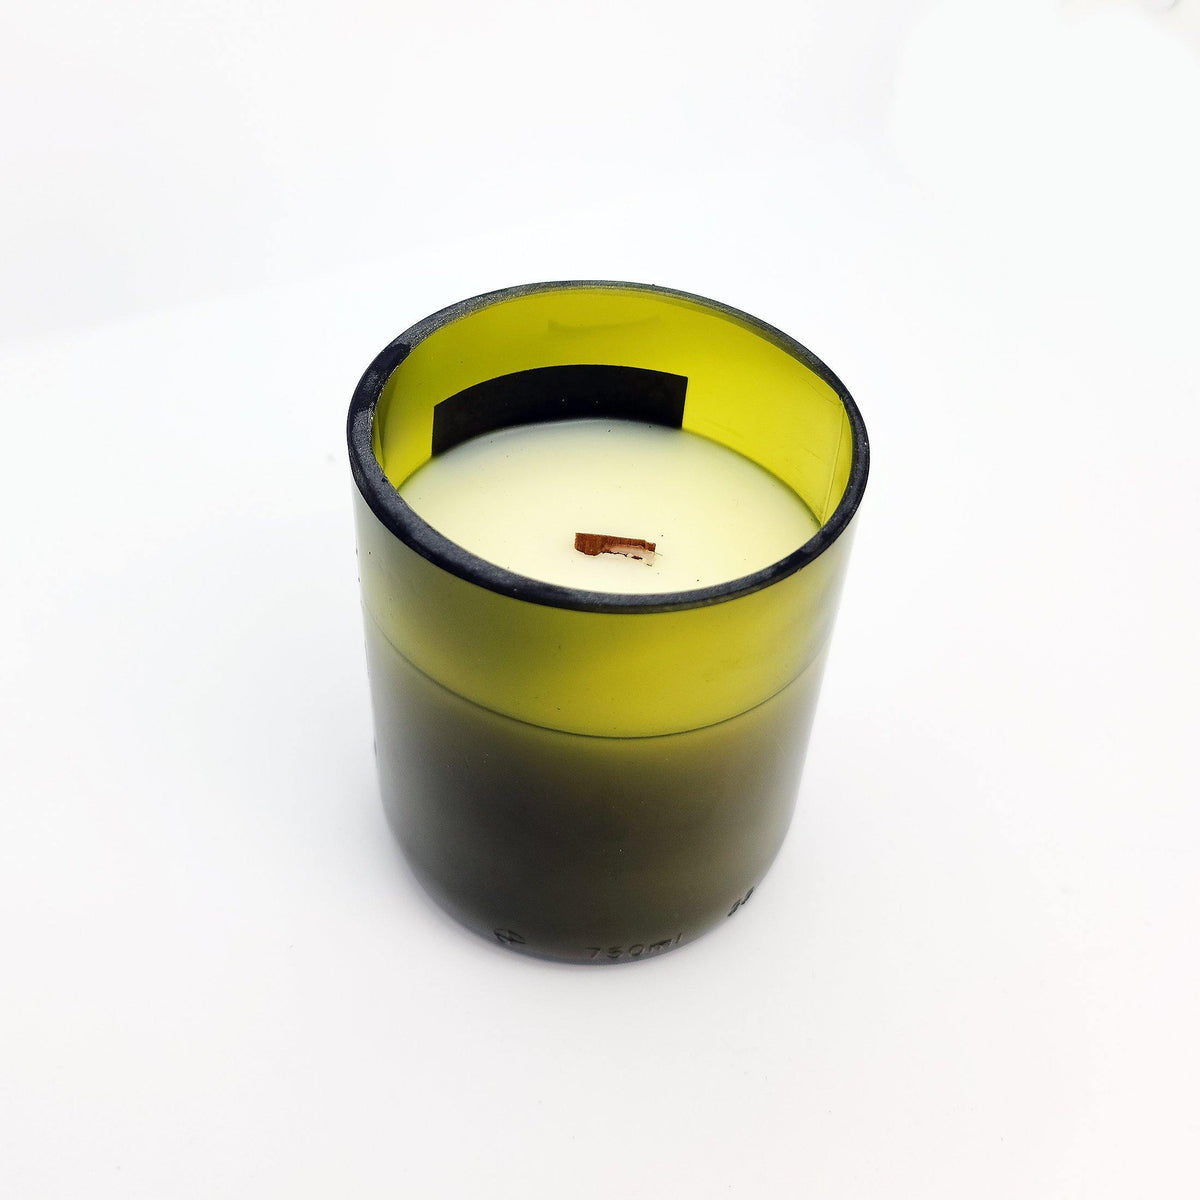 Orchid Vanilla & Shea Butter Wooden Wick Scented Candle - LUVOCANDLES - Scented Wooden Wick Handmade in Montreal